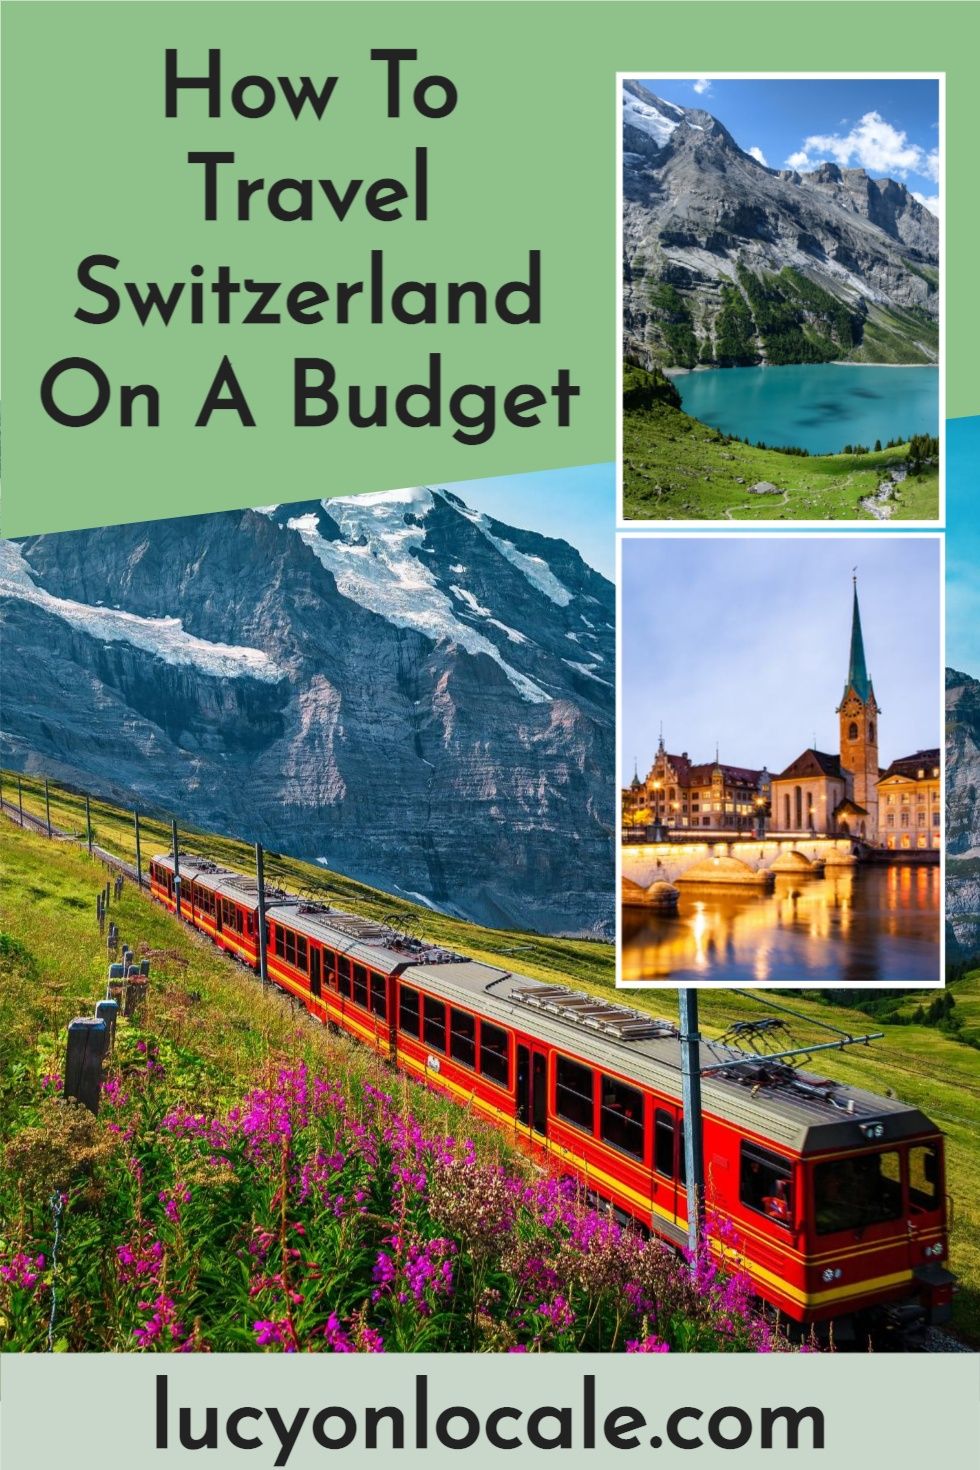 How To Travel Switzerland on a Budget